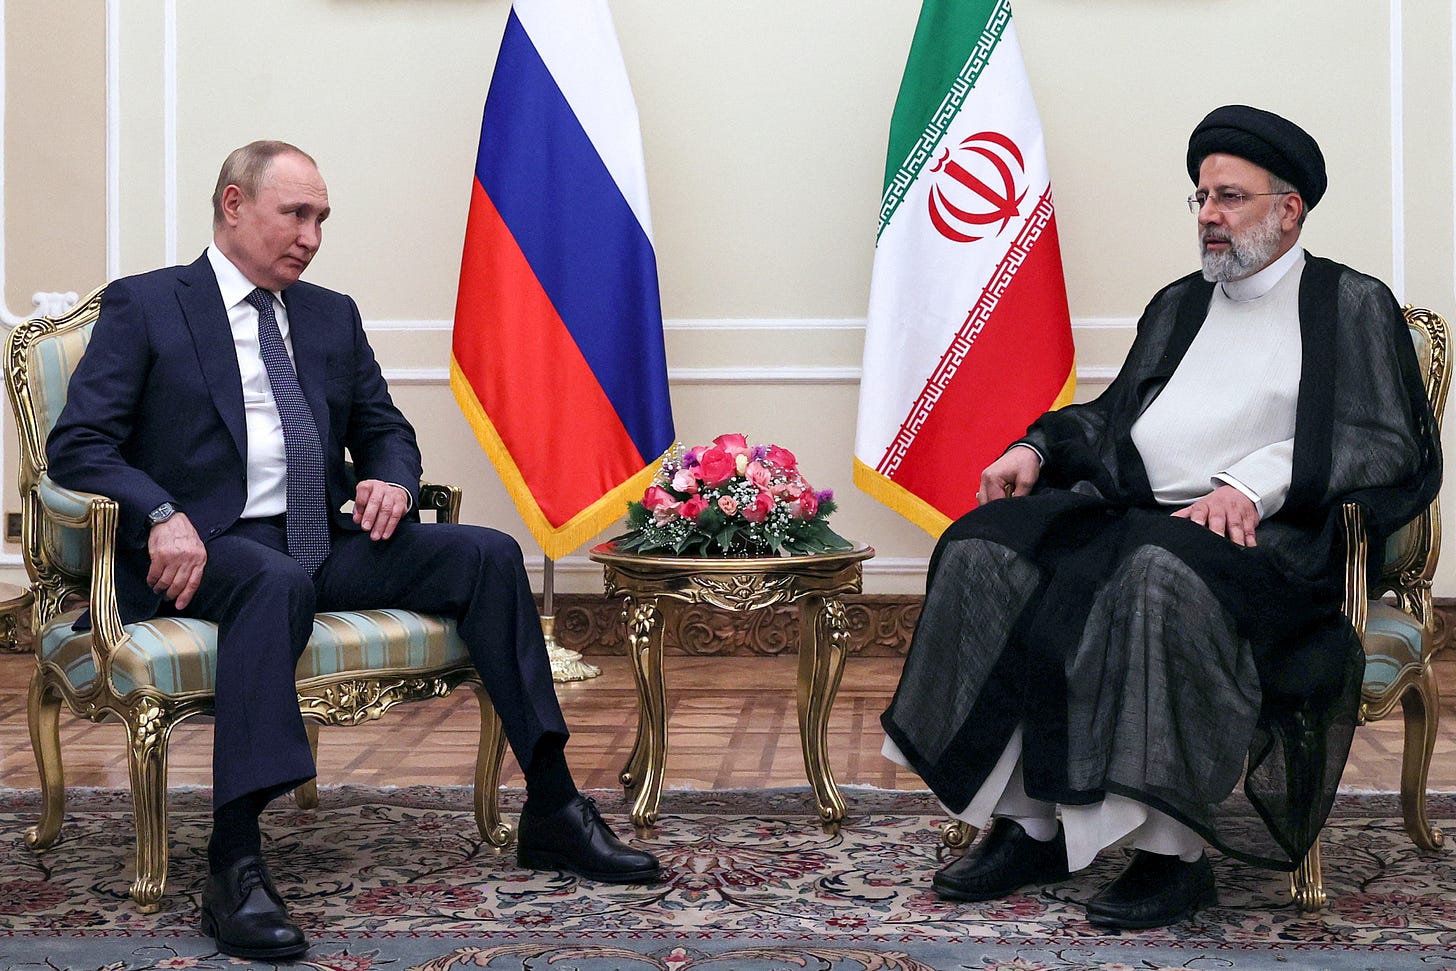 Alone together: How the war in Ukraine shapes the Russian-Iranian  relationship | ECFR